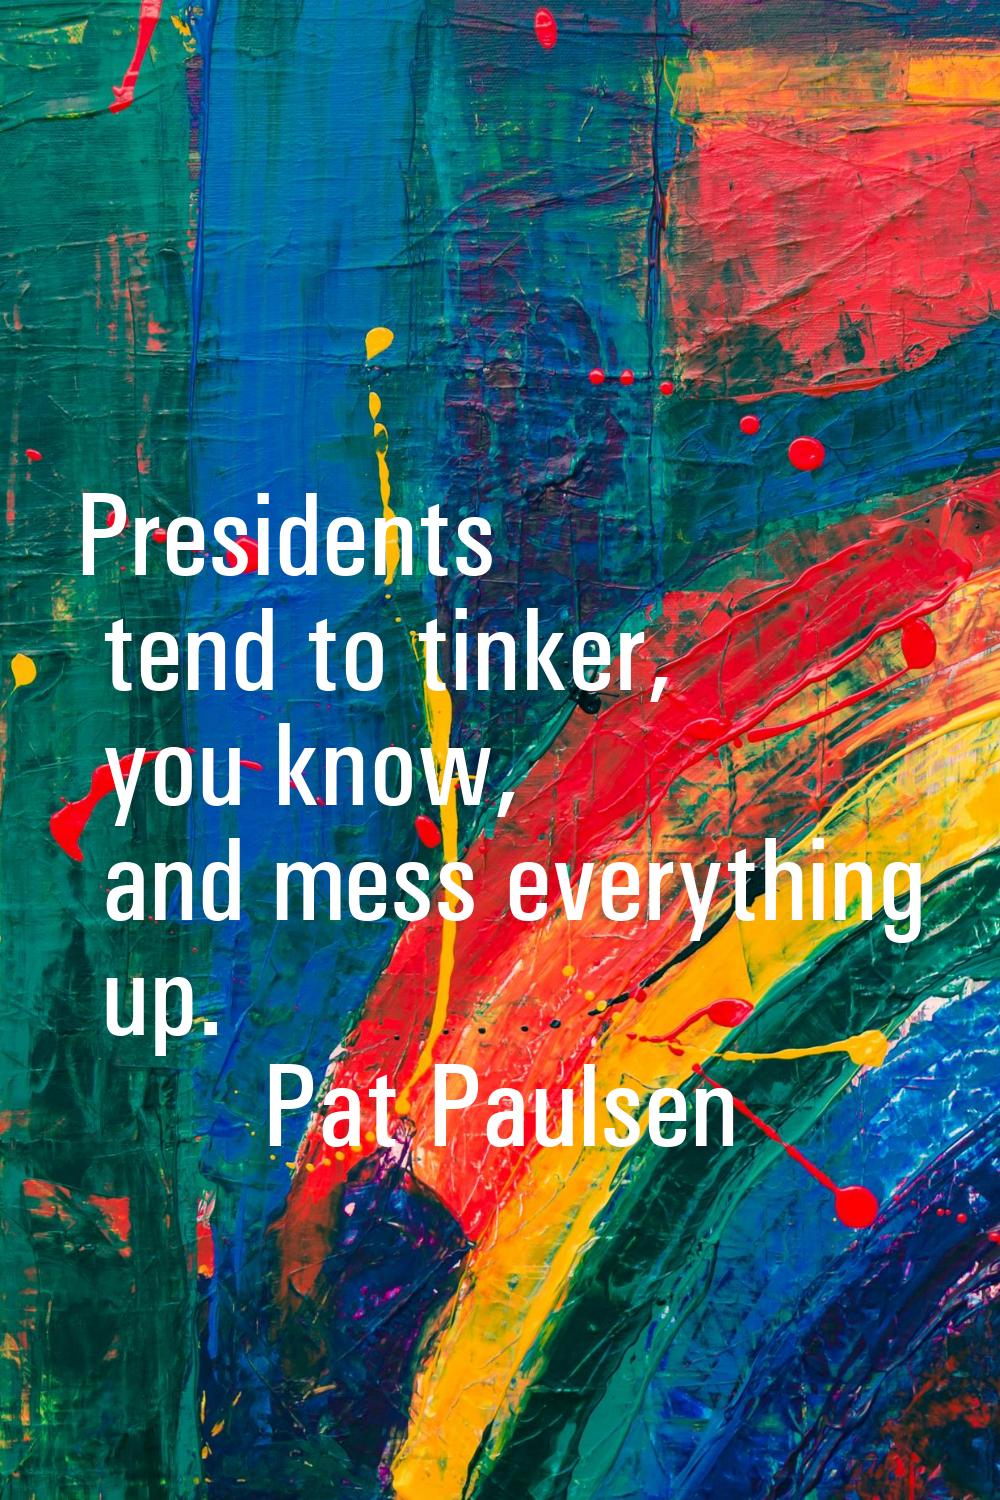 Presidents tend to tinker, you know, and mess everything up.